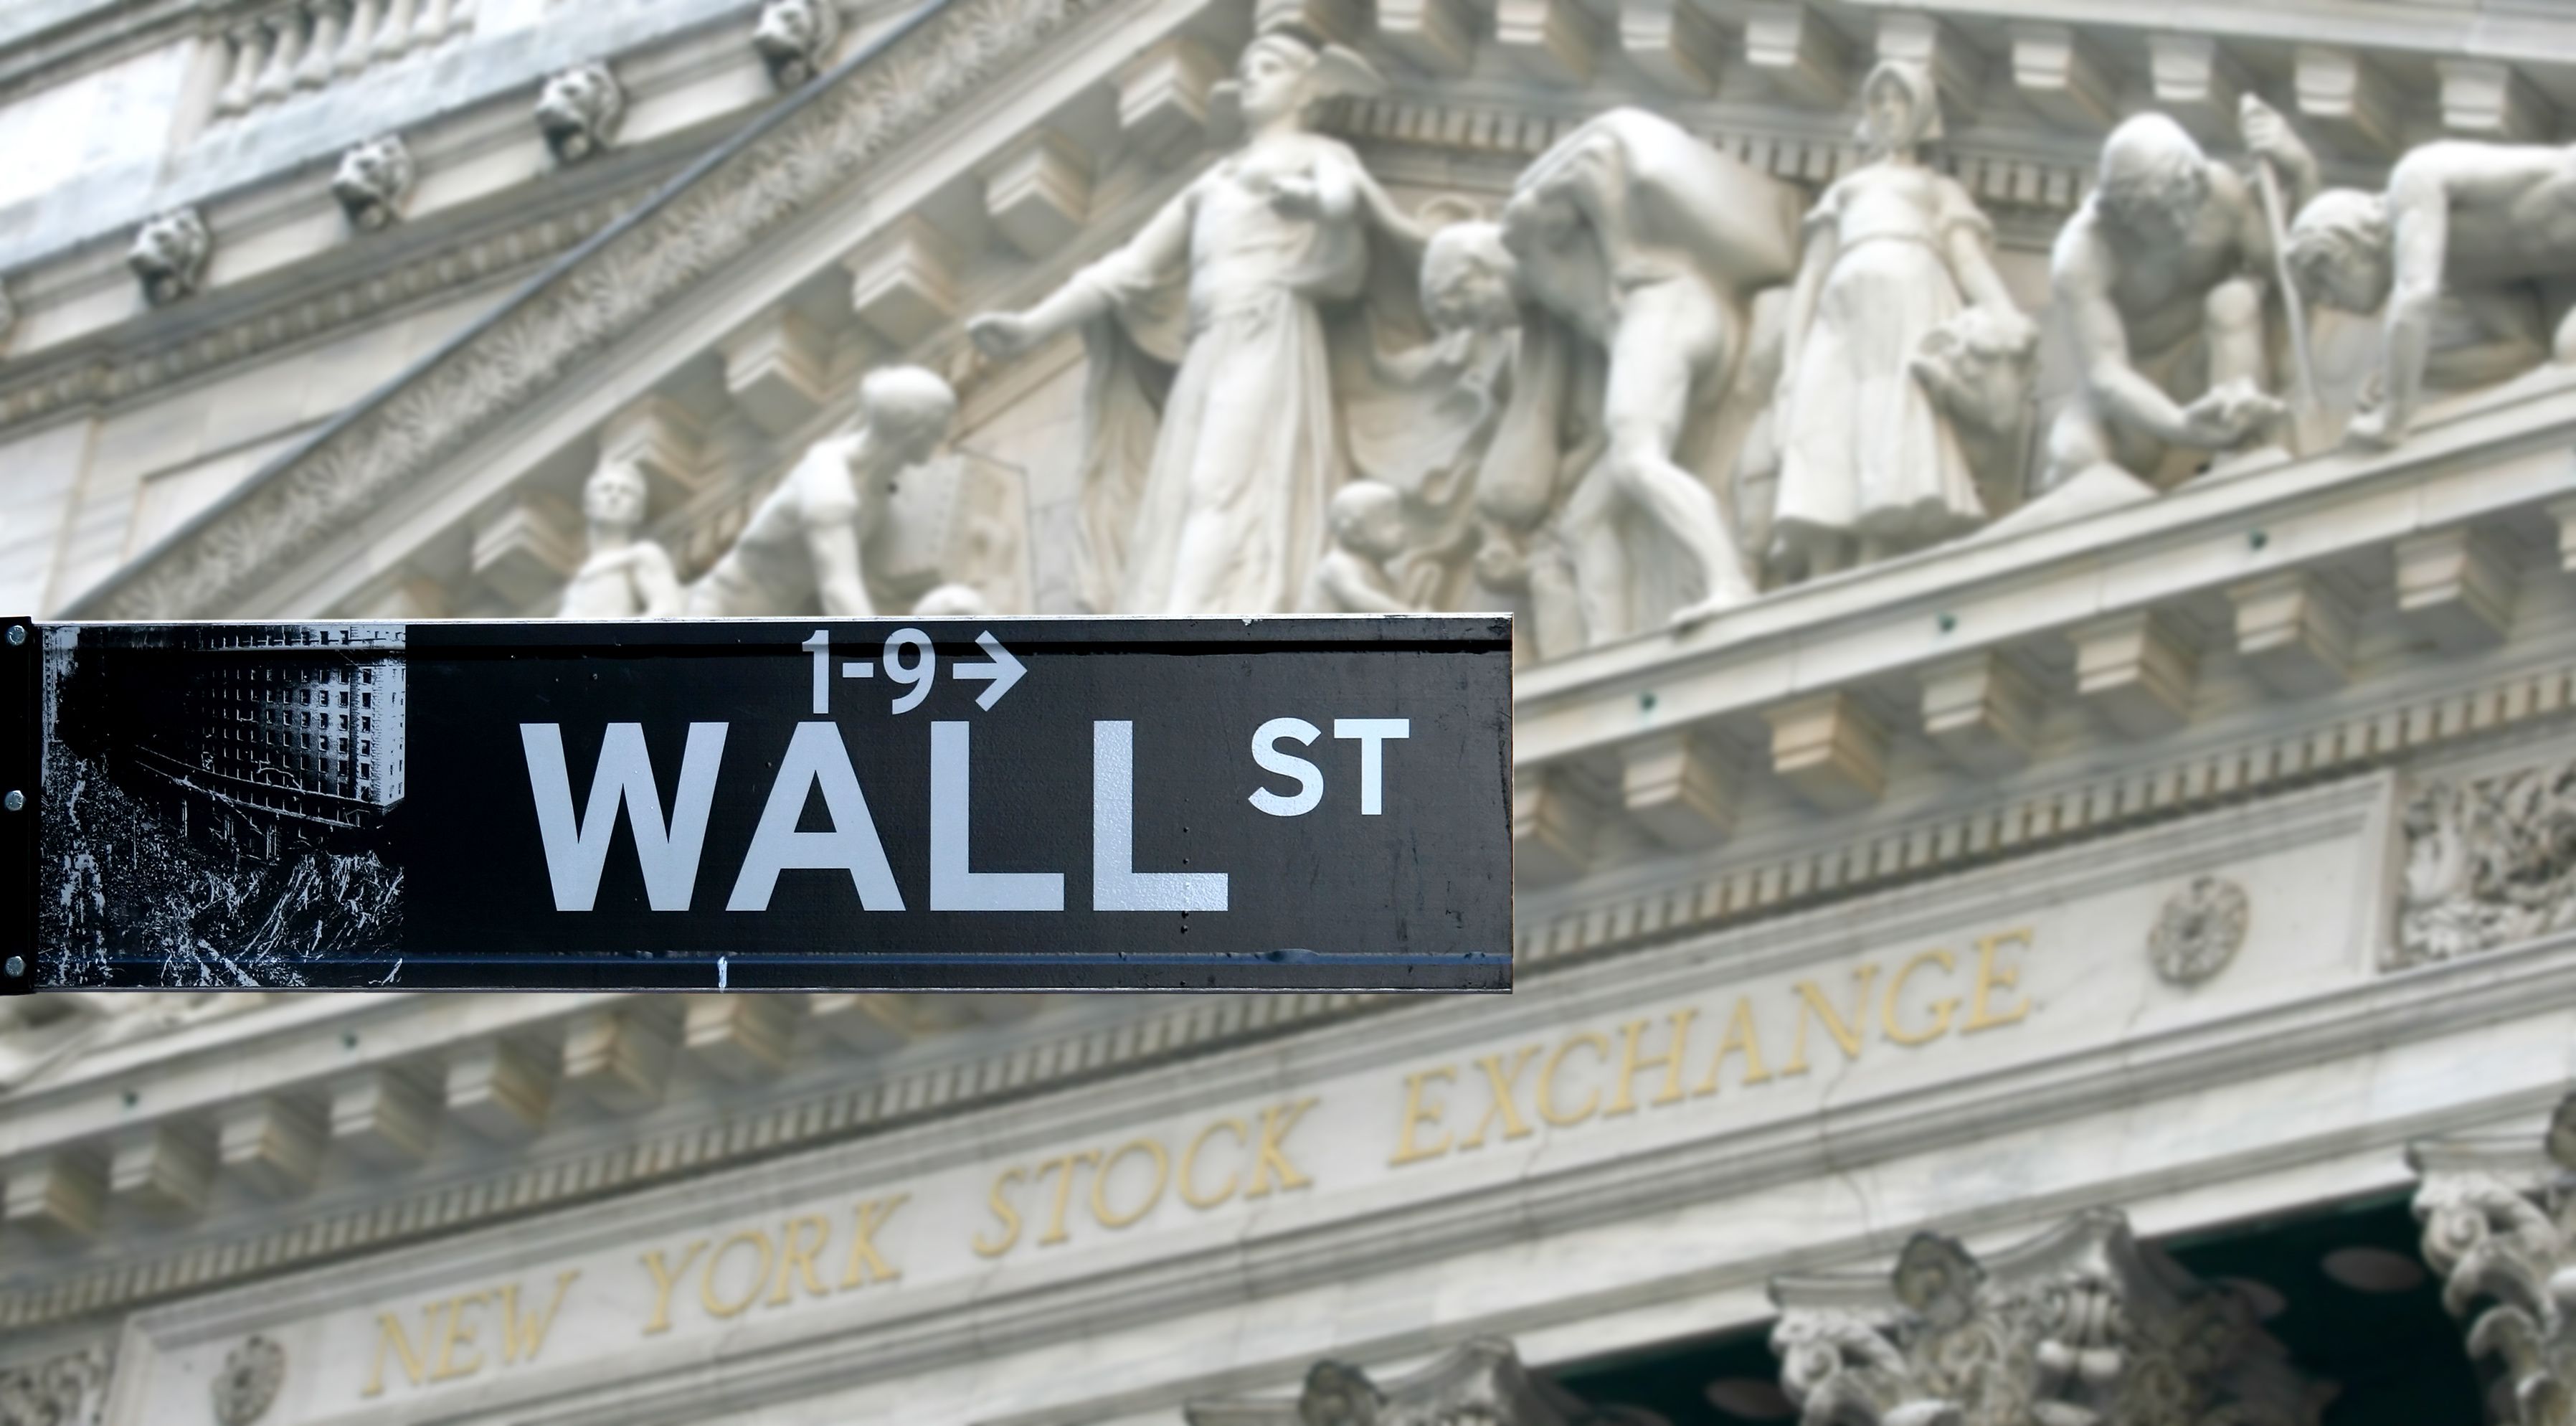 Article image shows a road sign on New York's Wall Street.